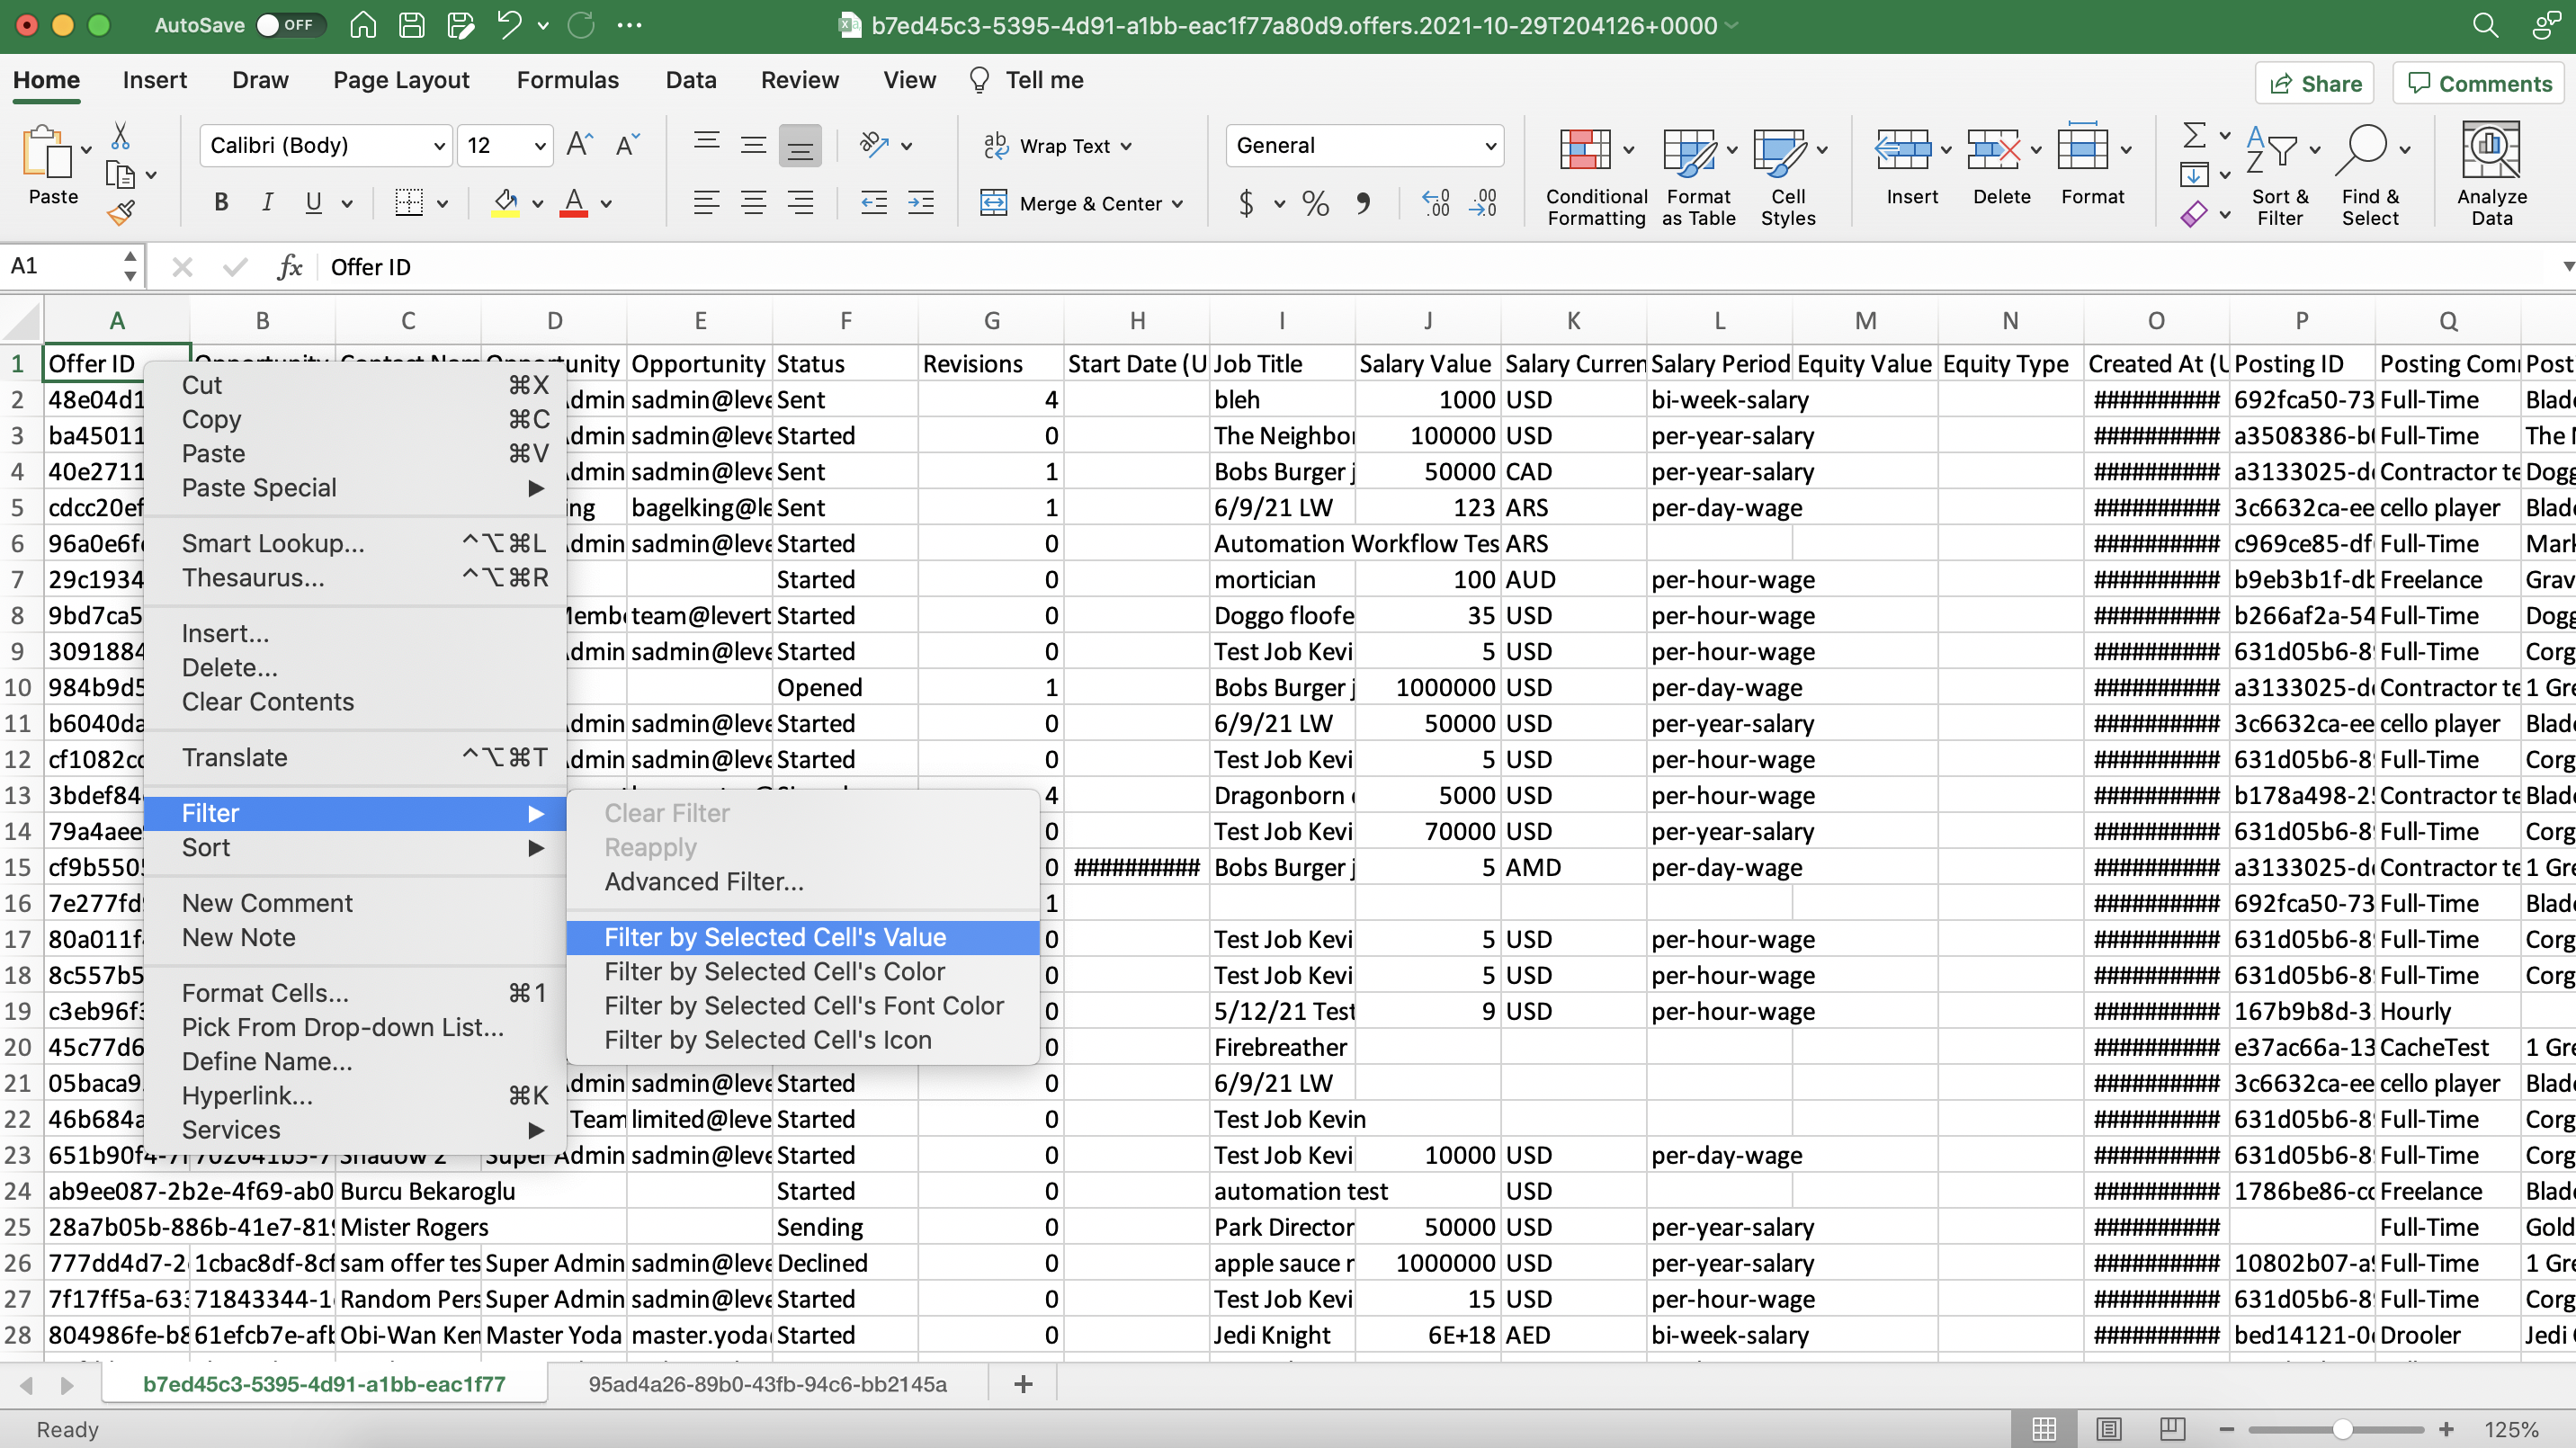 Menu expanded from cell A1 in Offers spreadsheet; Filter and Filter by Selected Cell's Value options are highlighted.